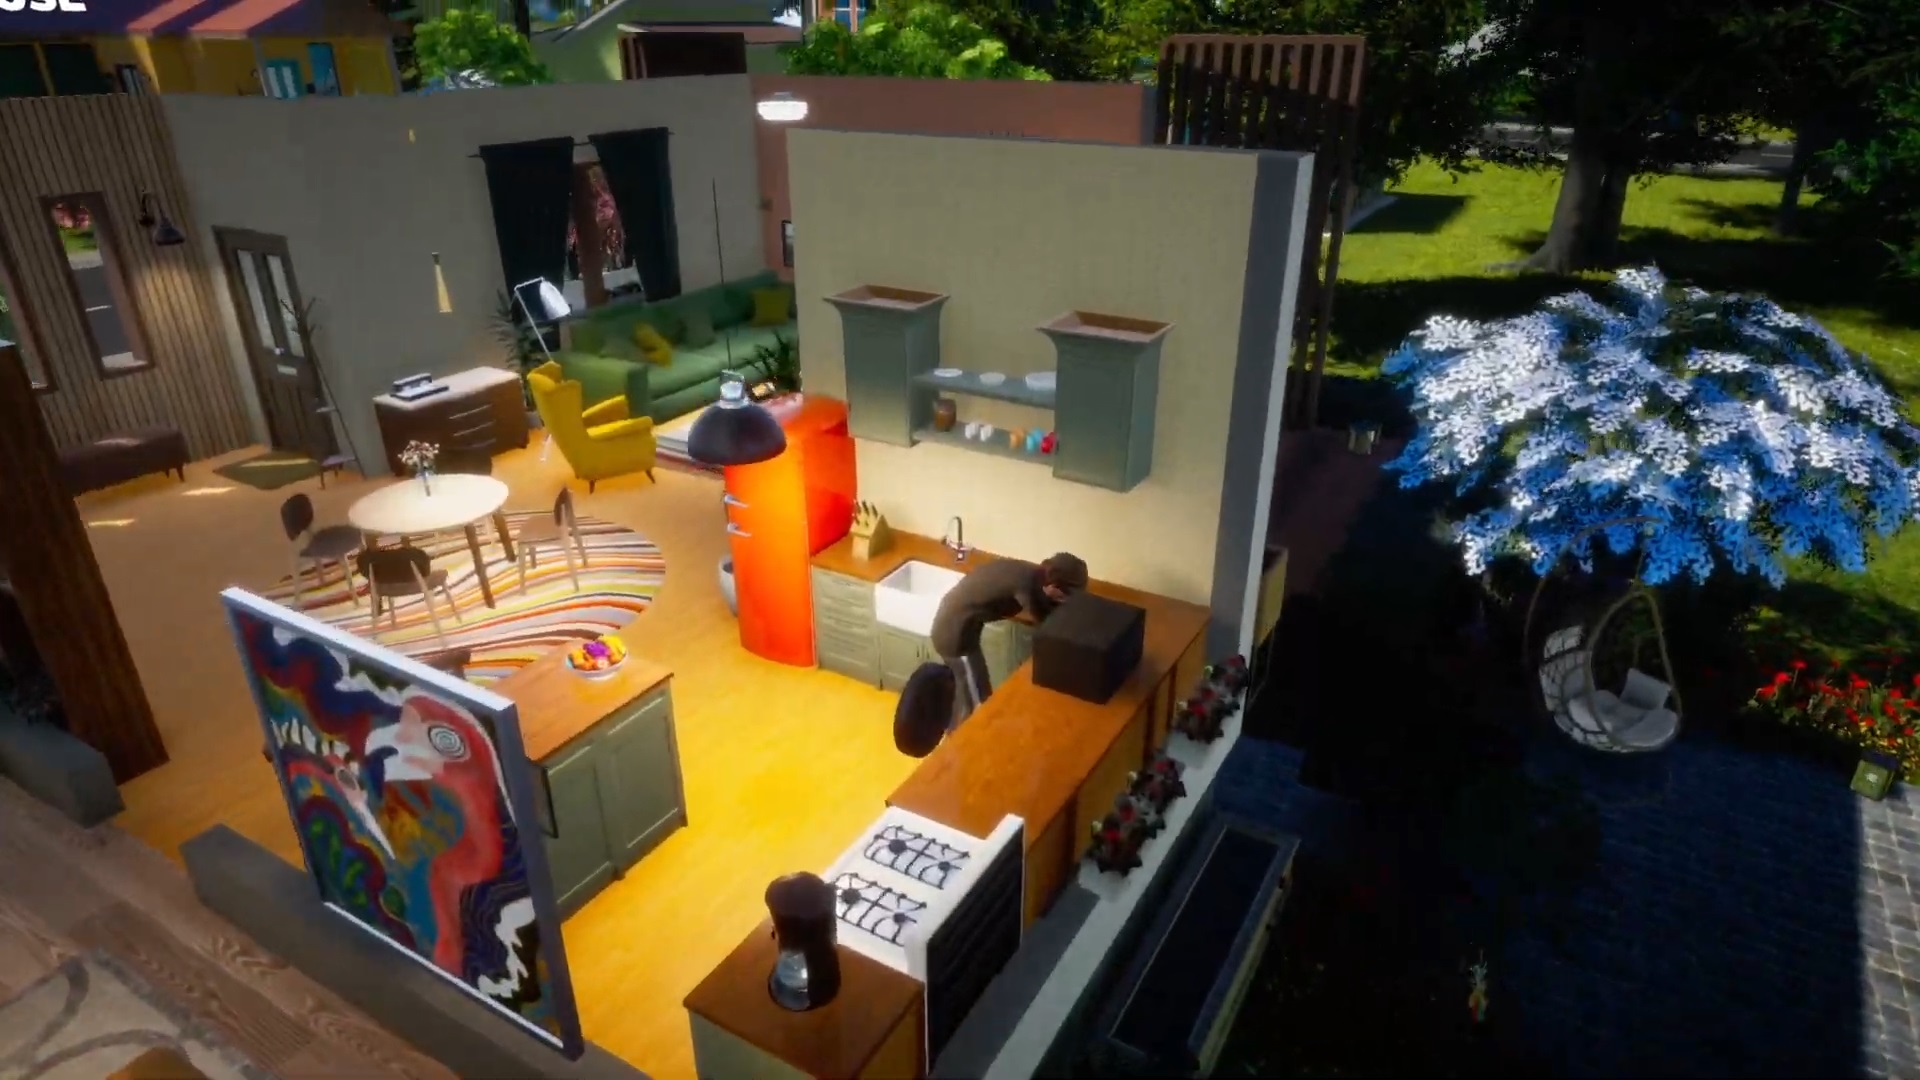 Paradox Interactive - a character microwaves food in a kitchen of a house with a '70s decor style